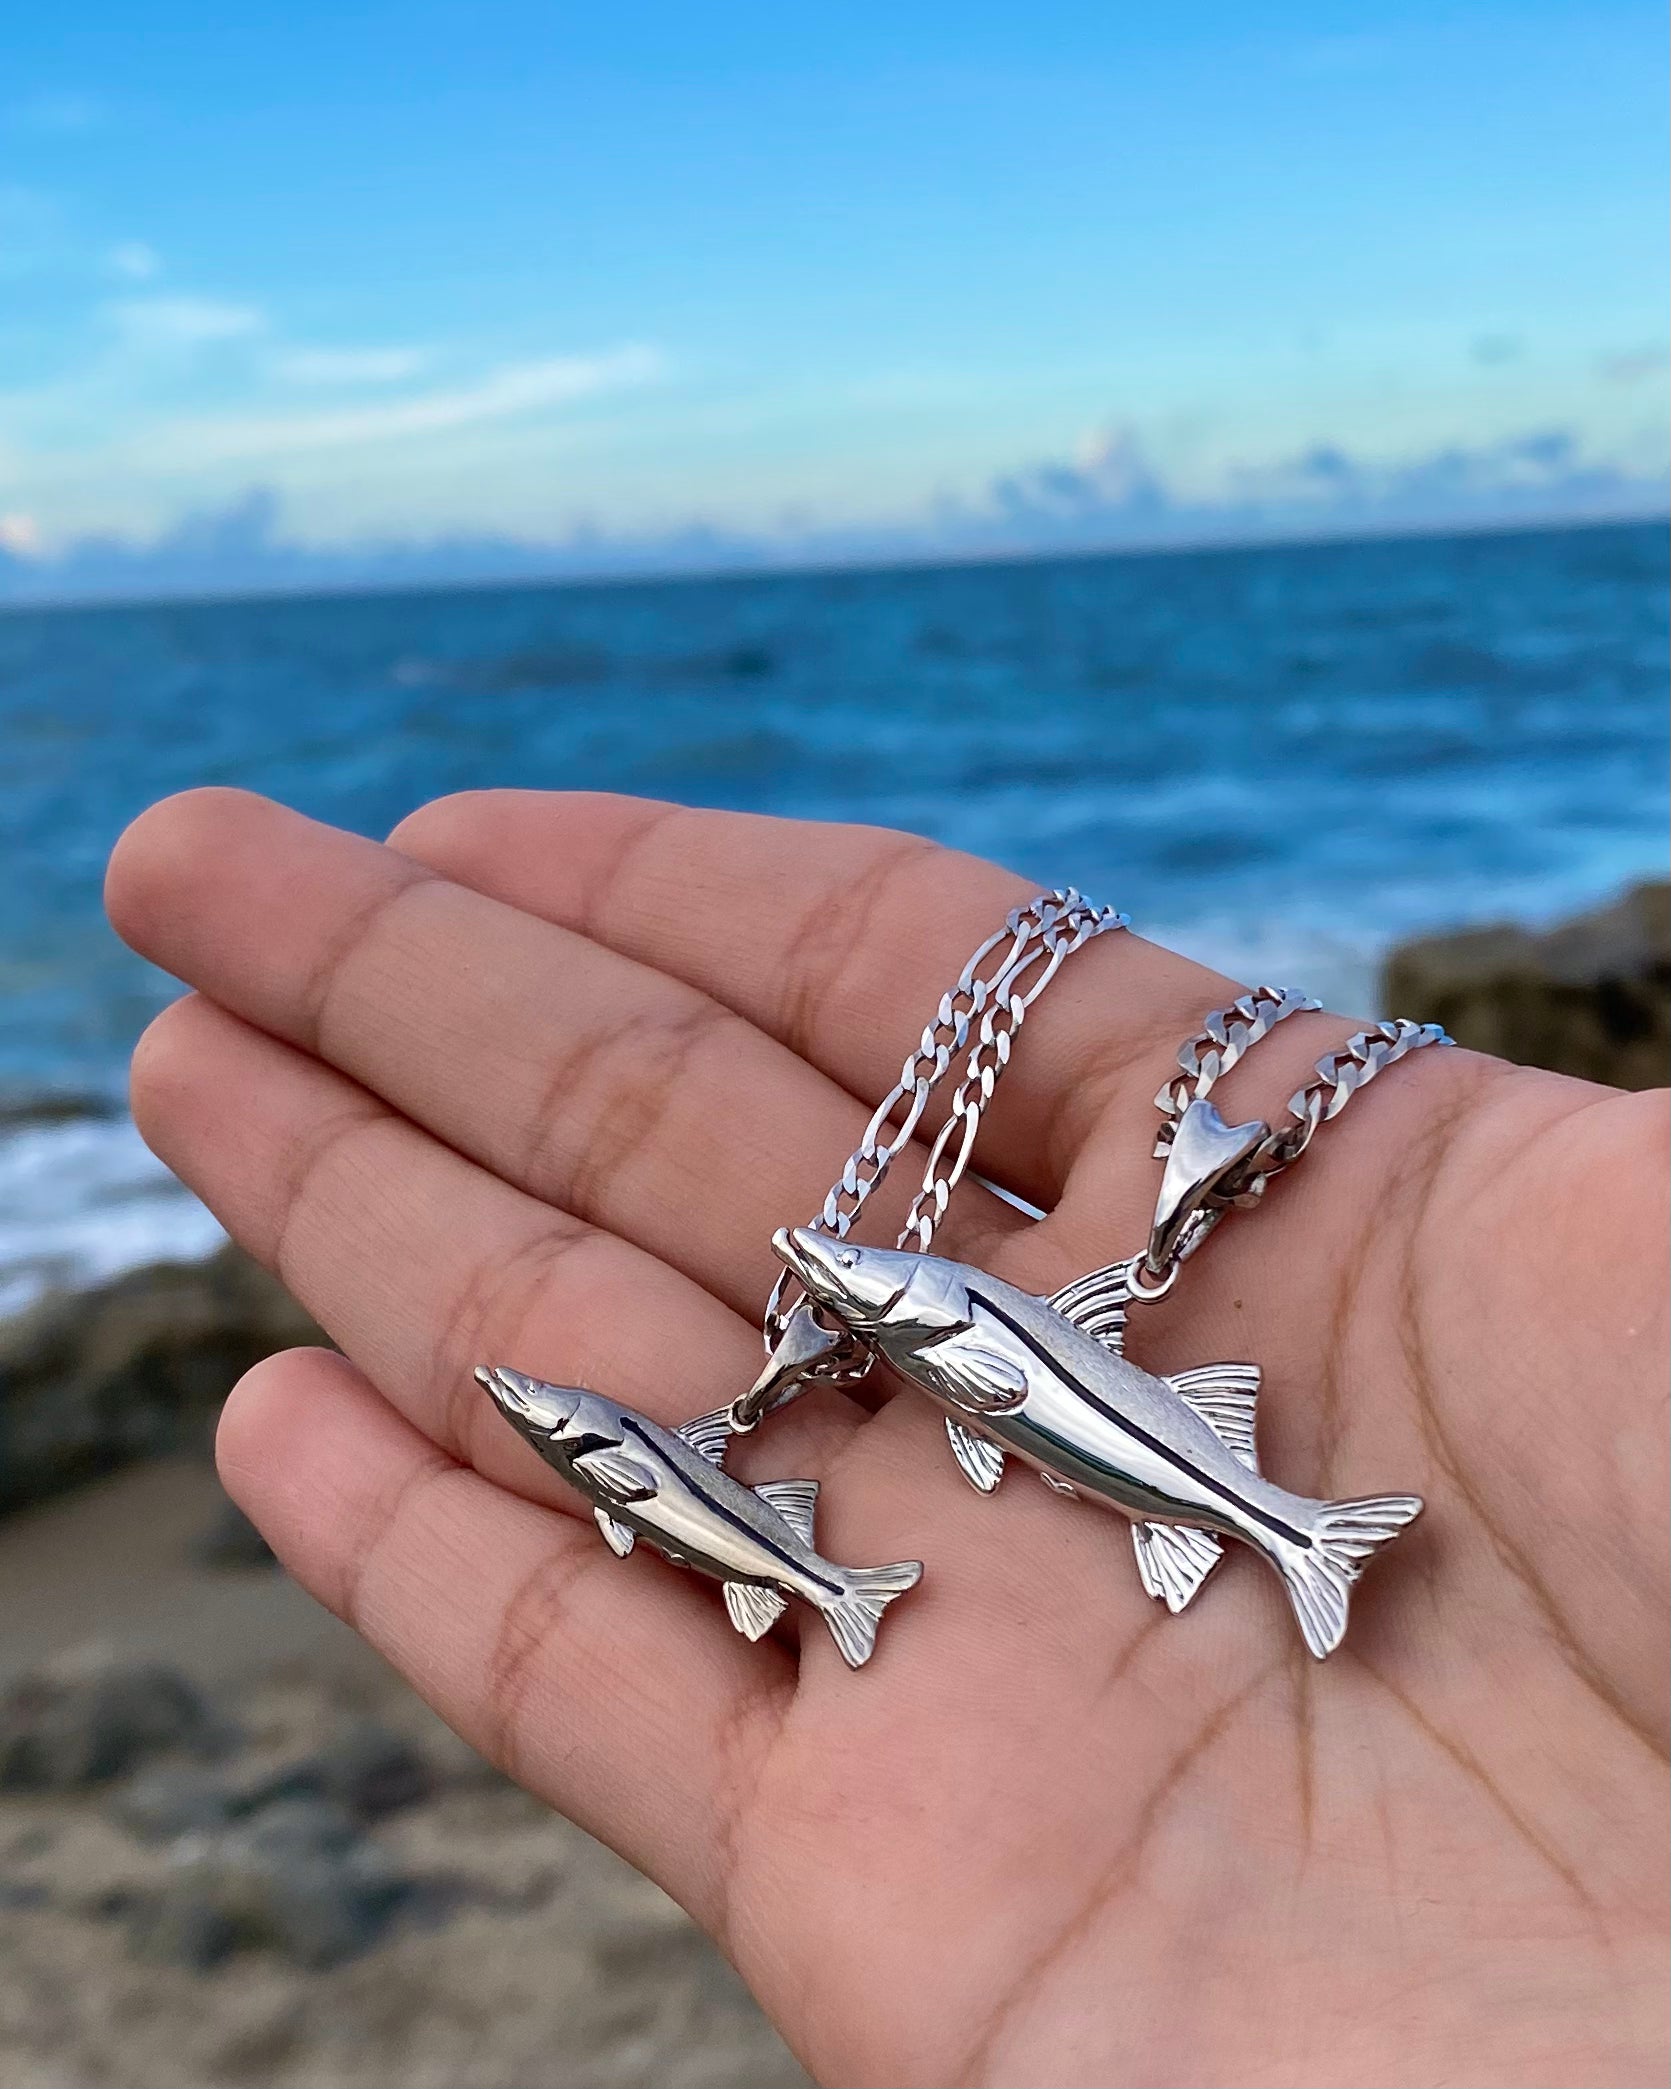 small and standard sized silver snook necklaces by castil